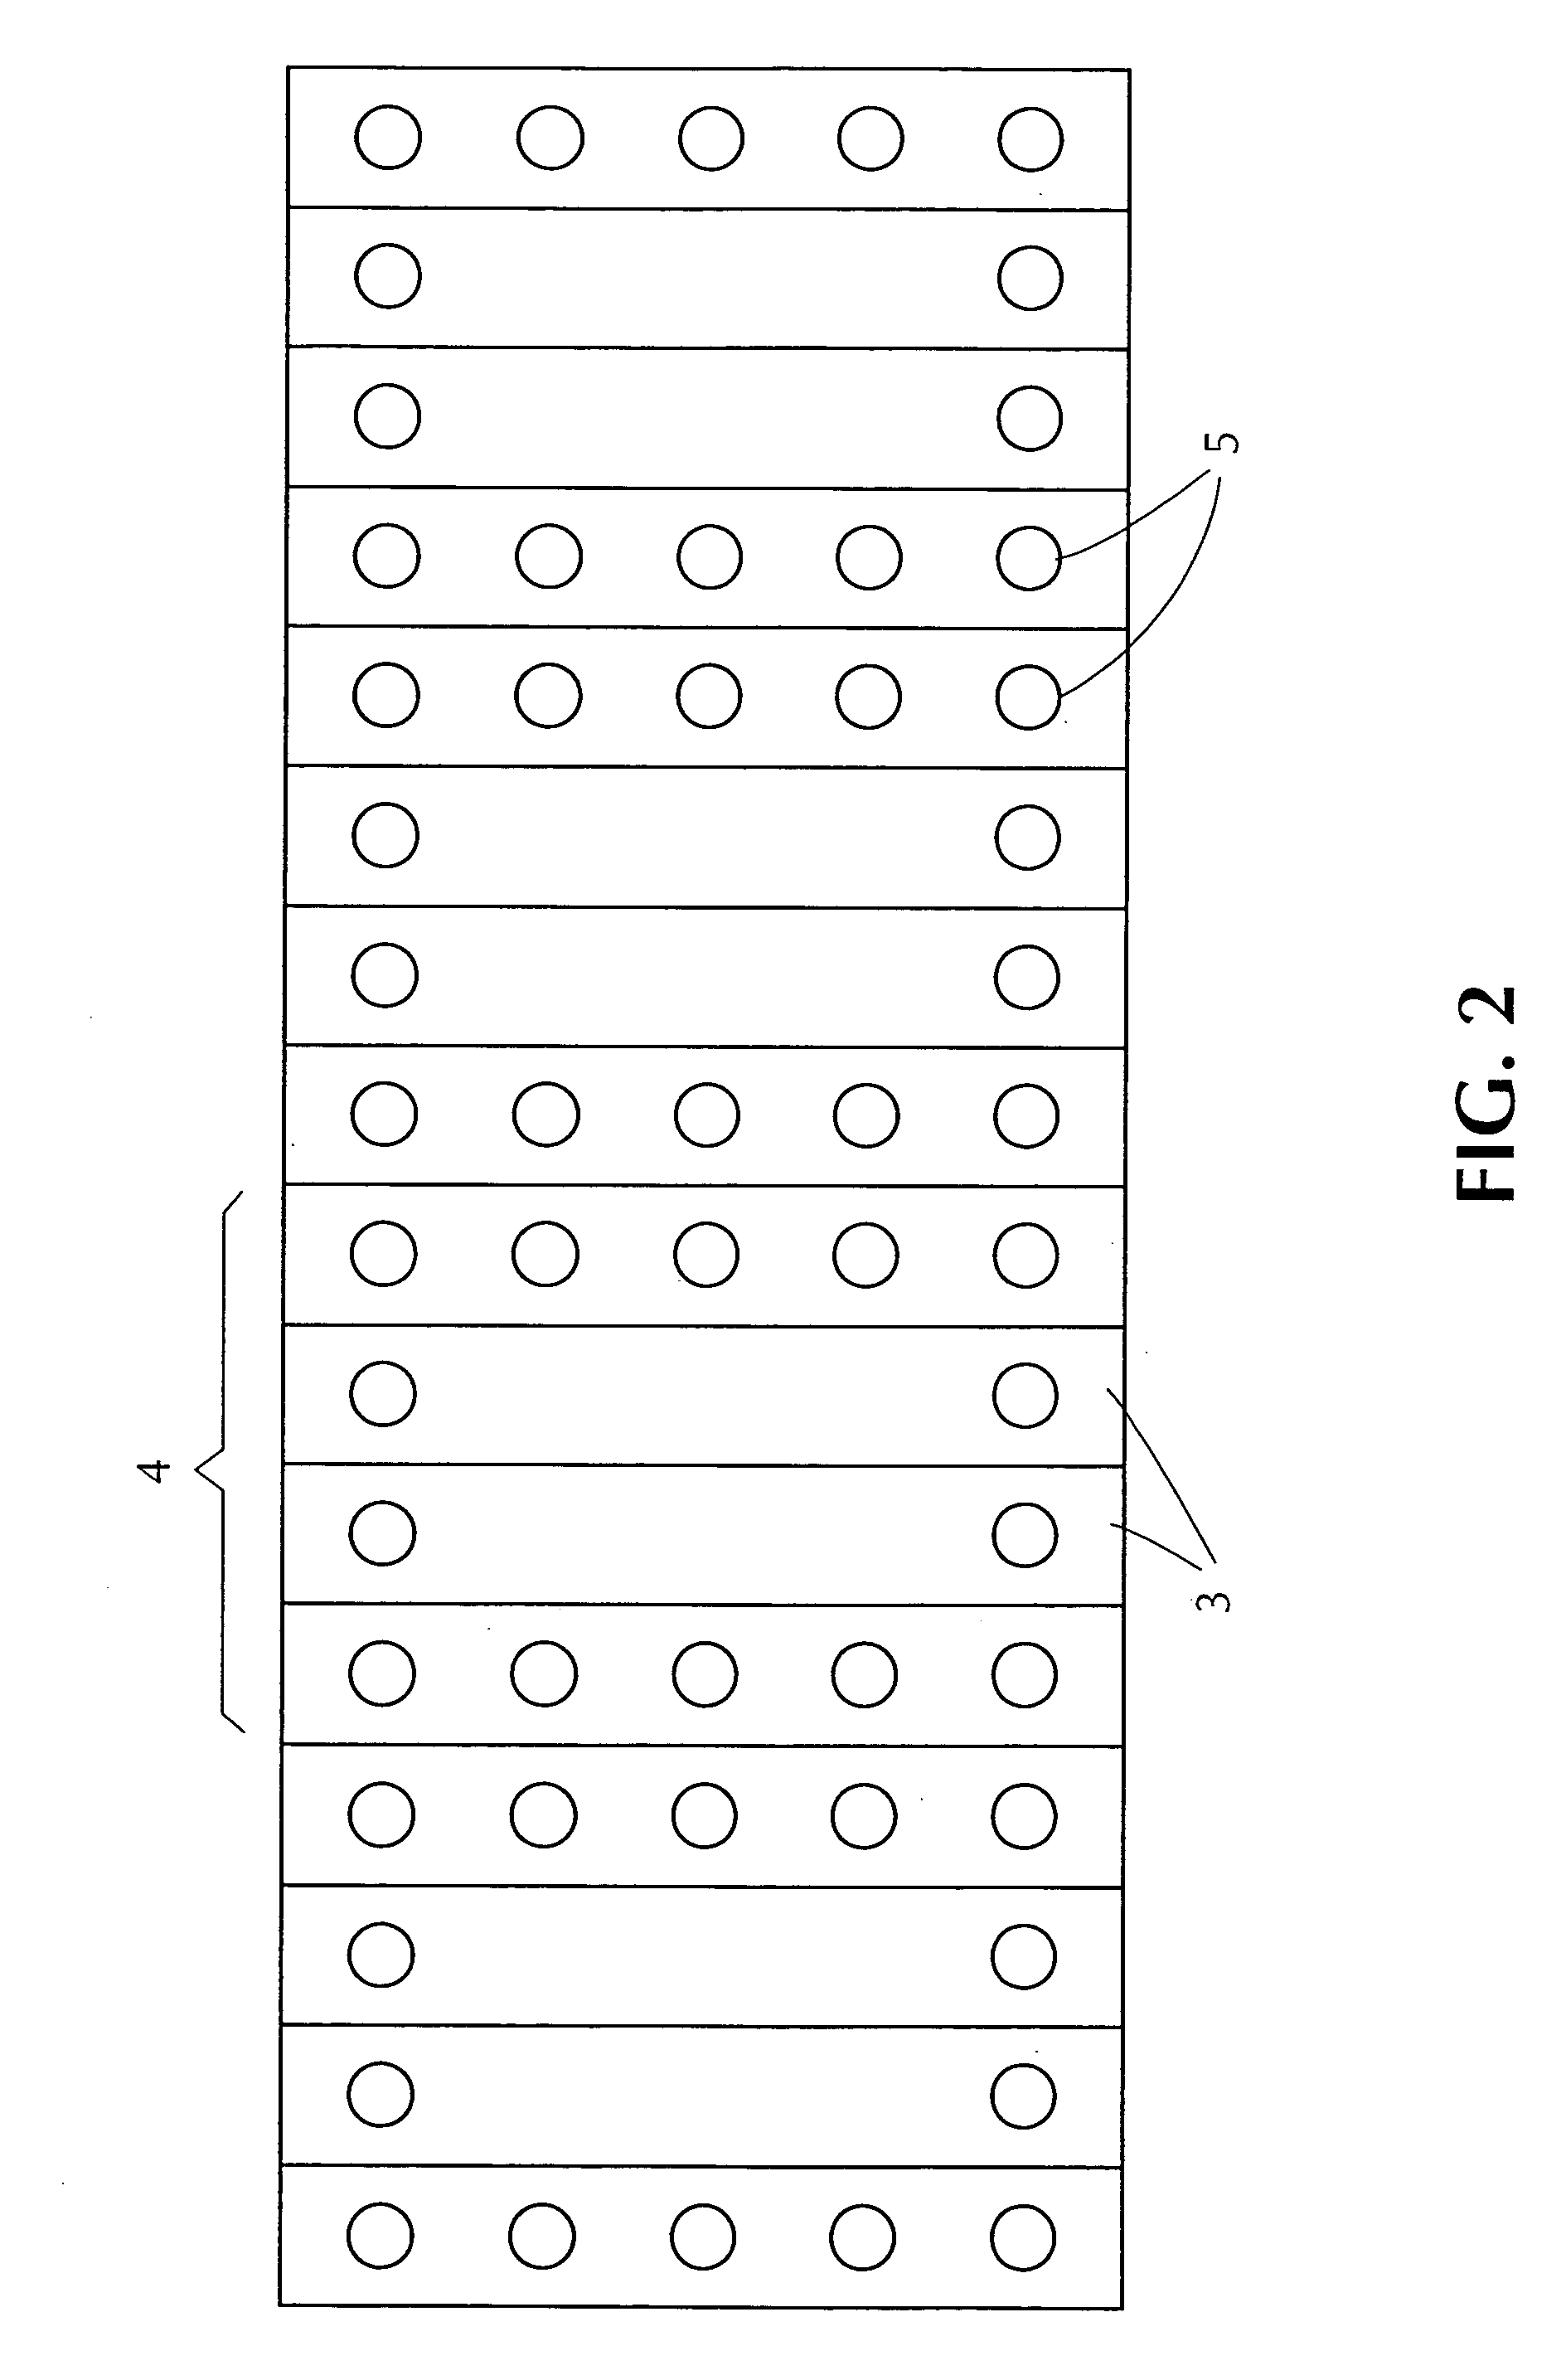 Method for decorating edible substrates with pellet shaped candy pieces